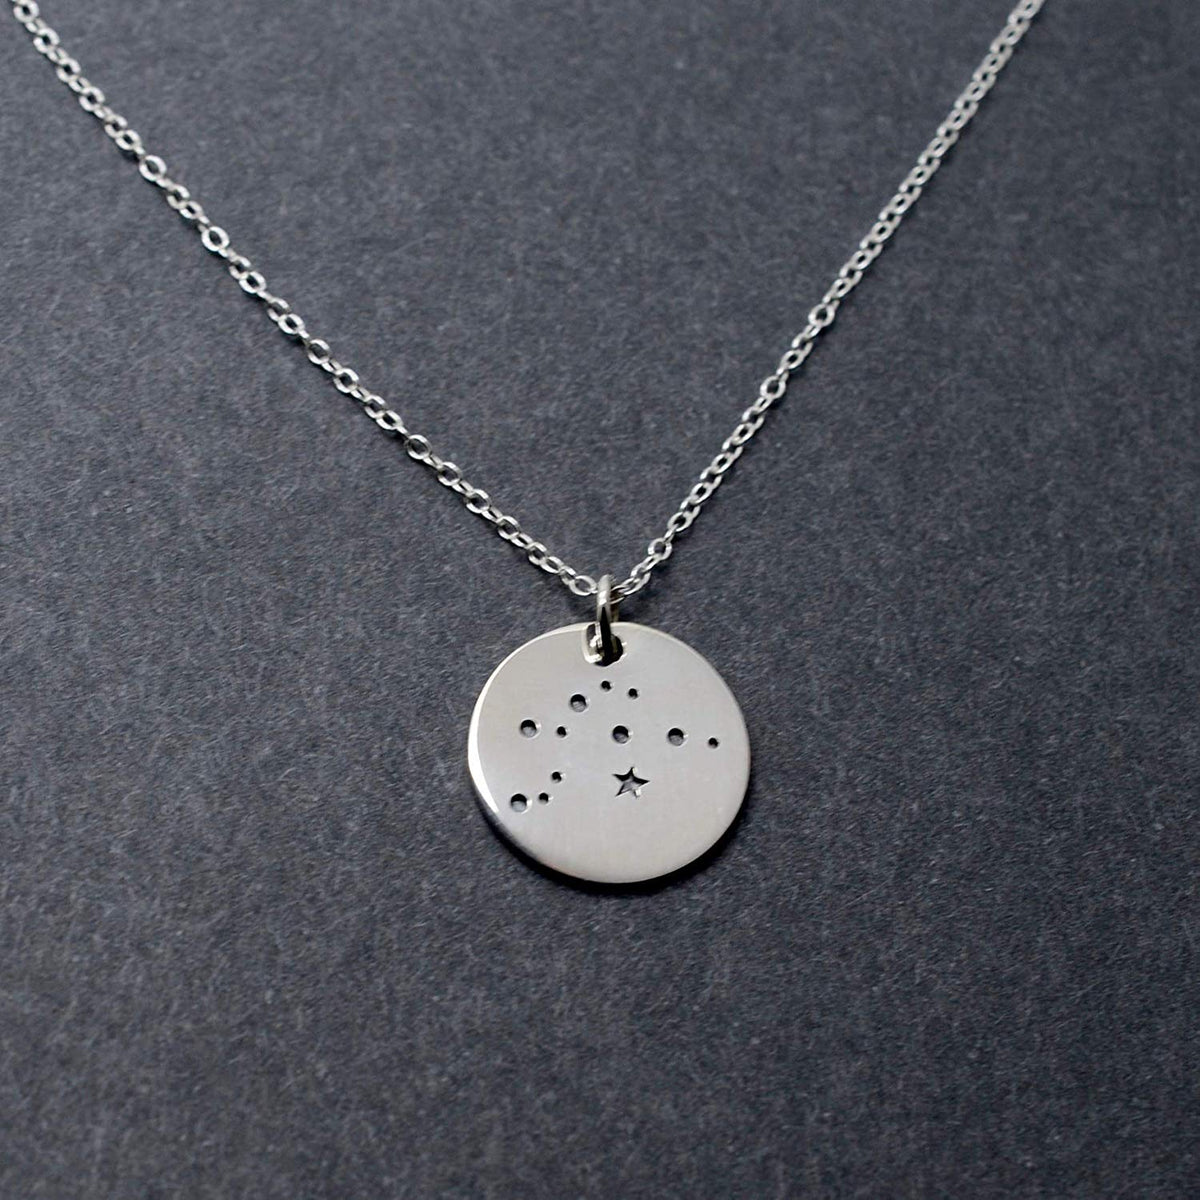 Aquarius Zodiac Sign Sterling Silver Constellation Necklace - Love It Personalized